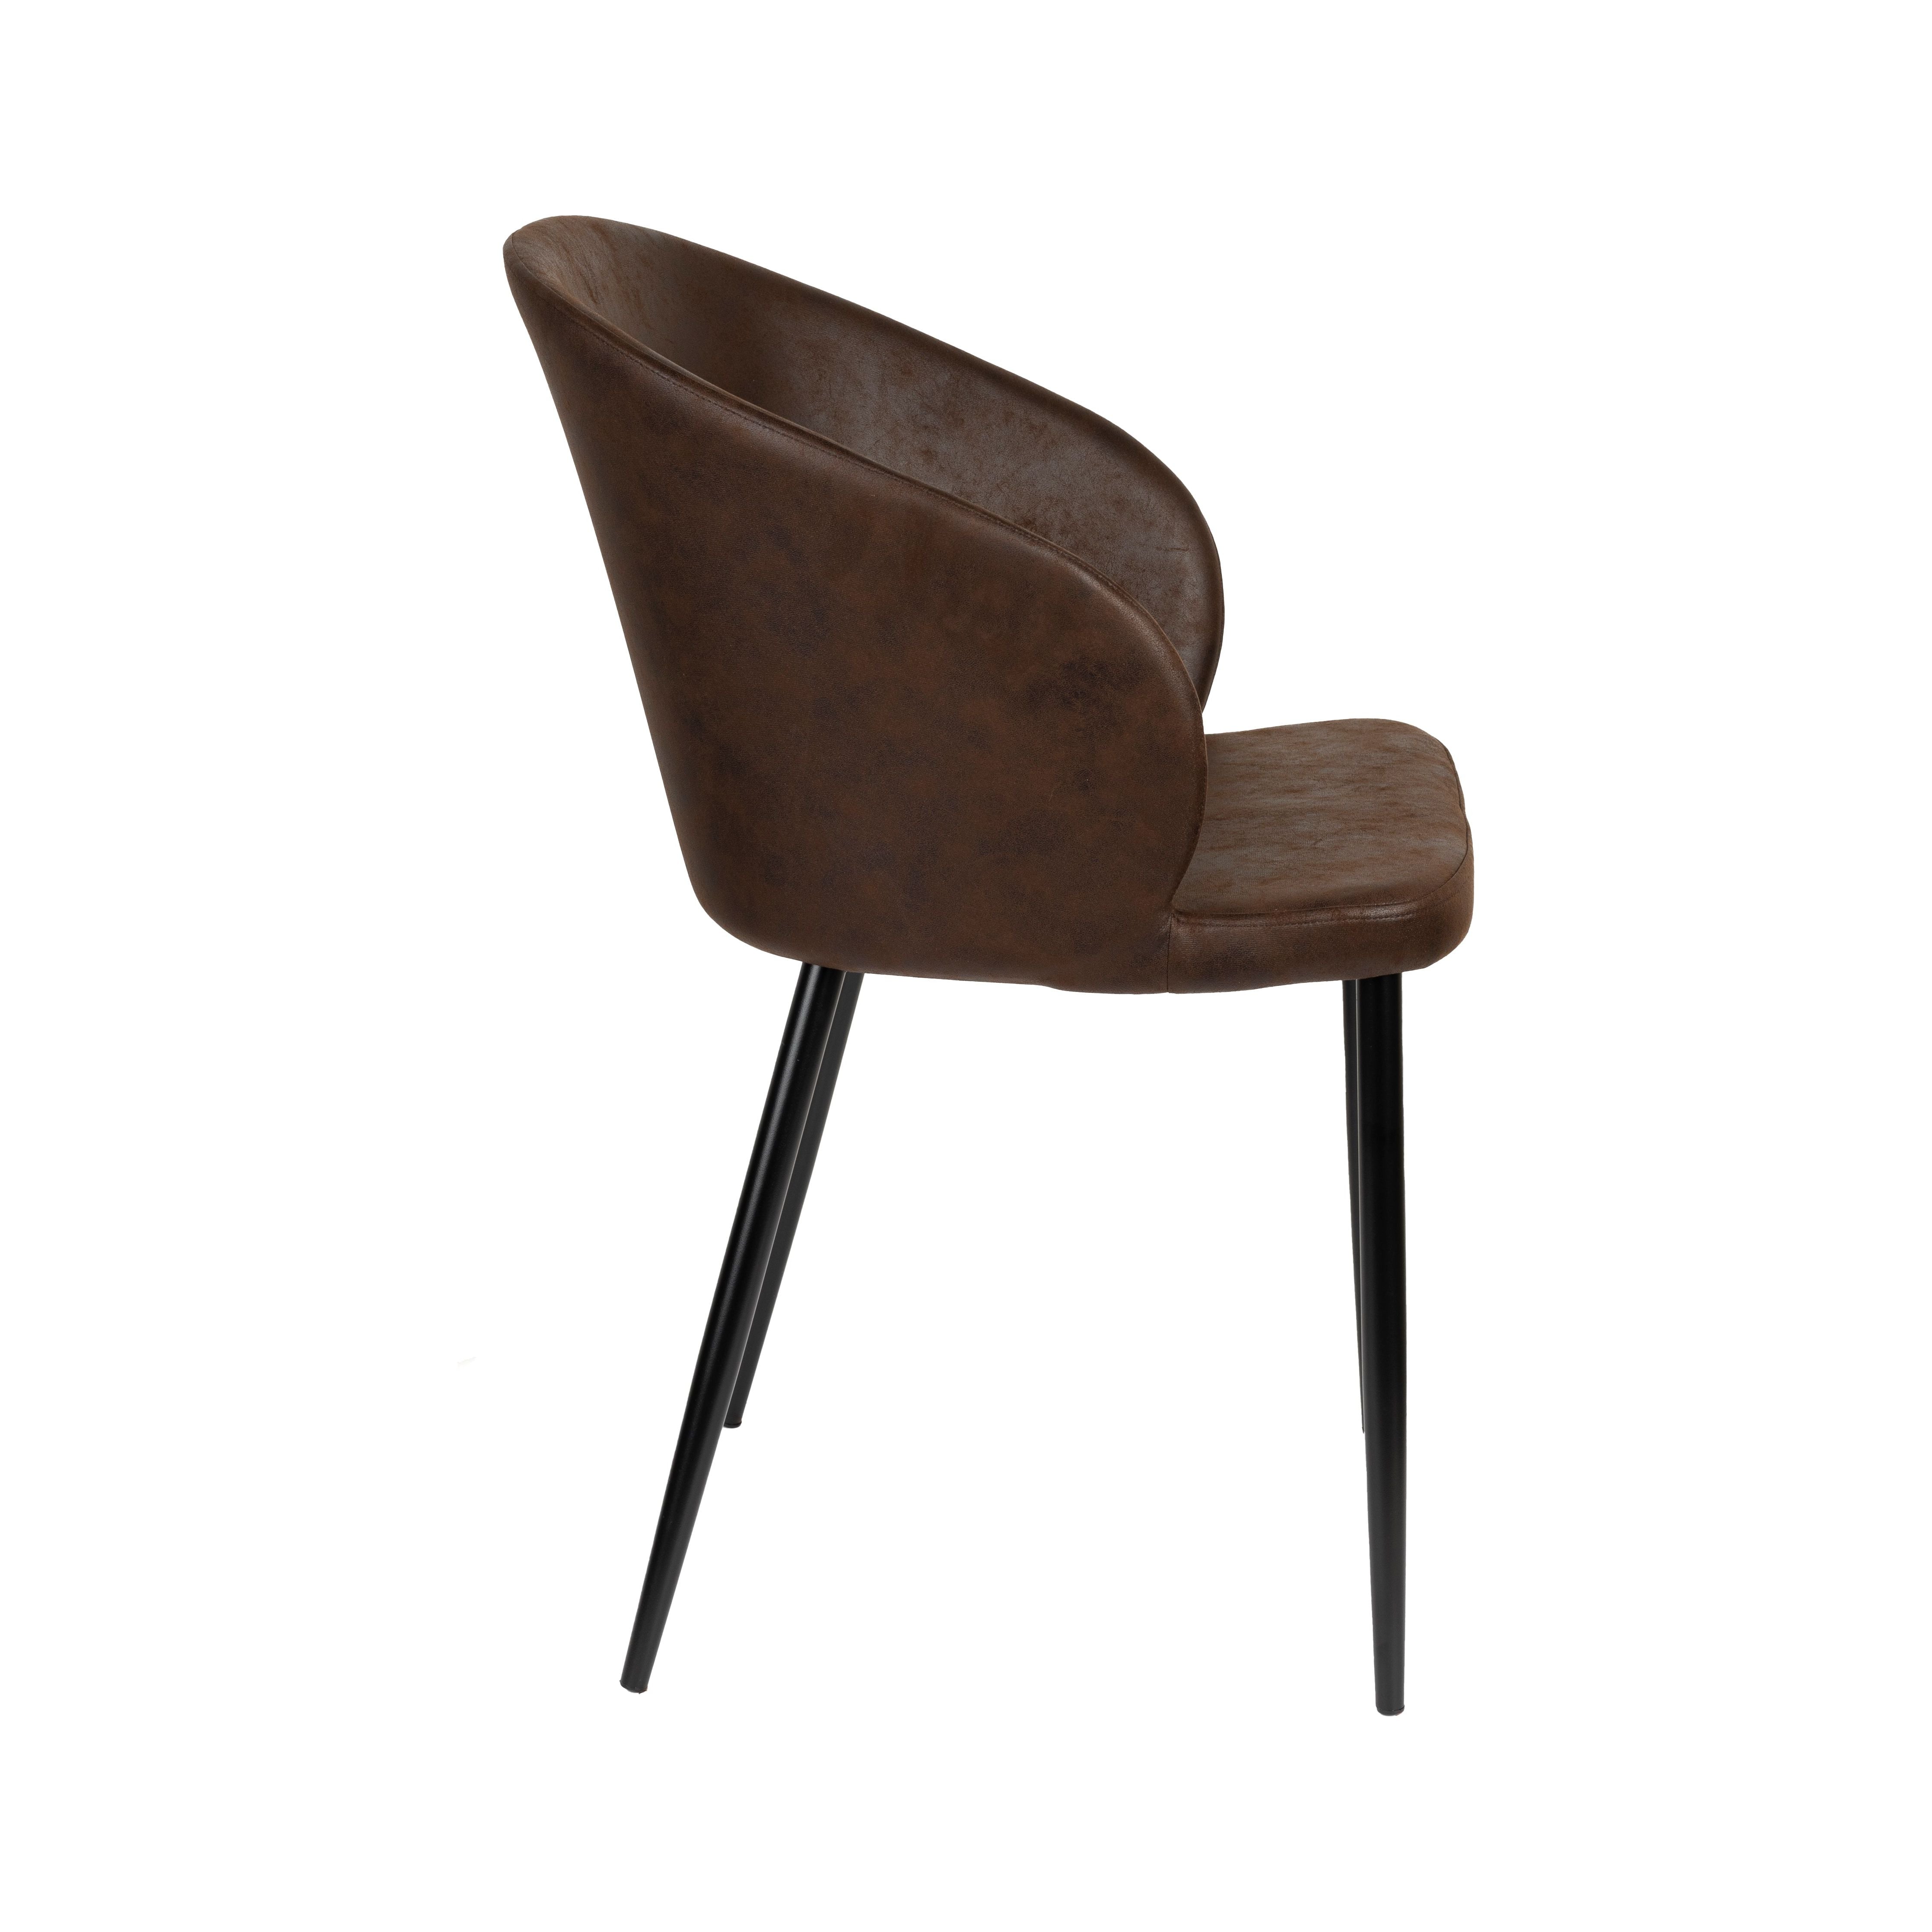 Chair hadid brown | 2 pieces